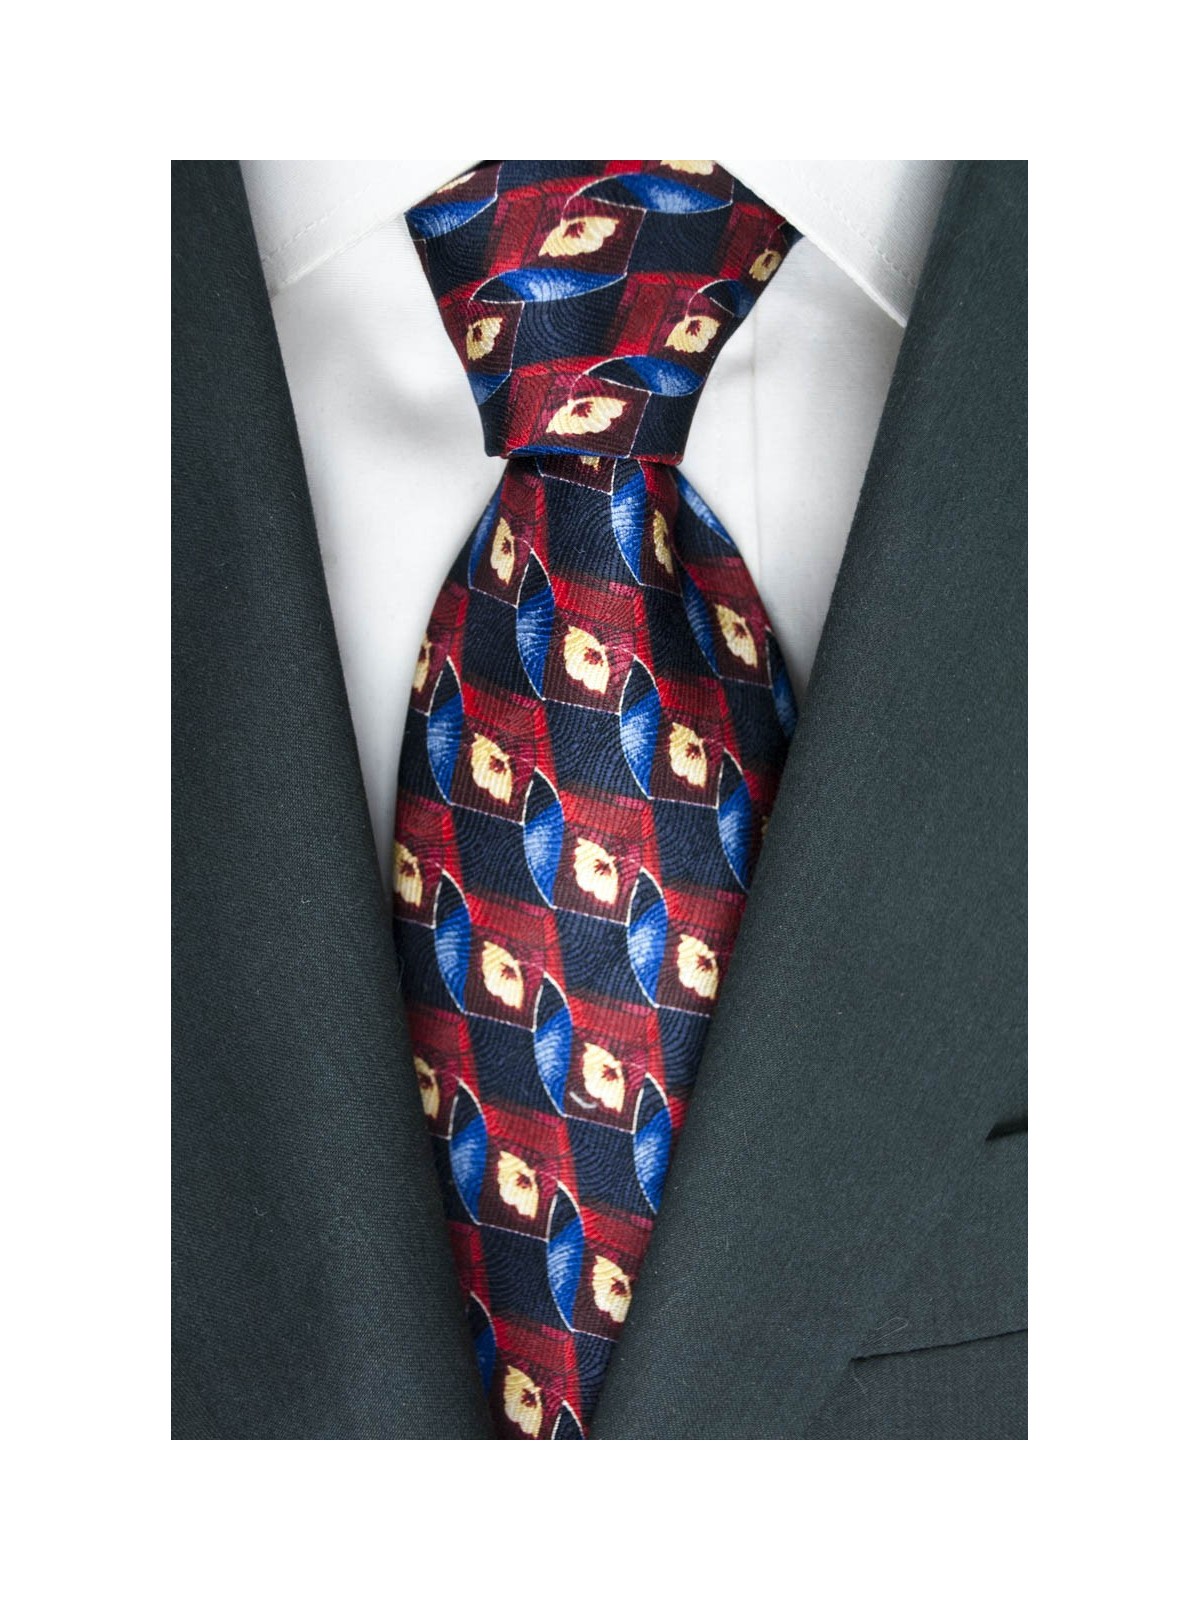 Blue tie with Designs in Red and Ivory - Daniel Hechter - 100% Pure Silk